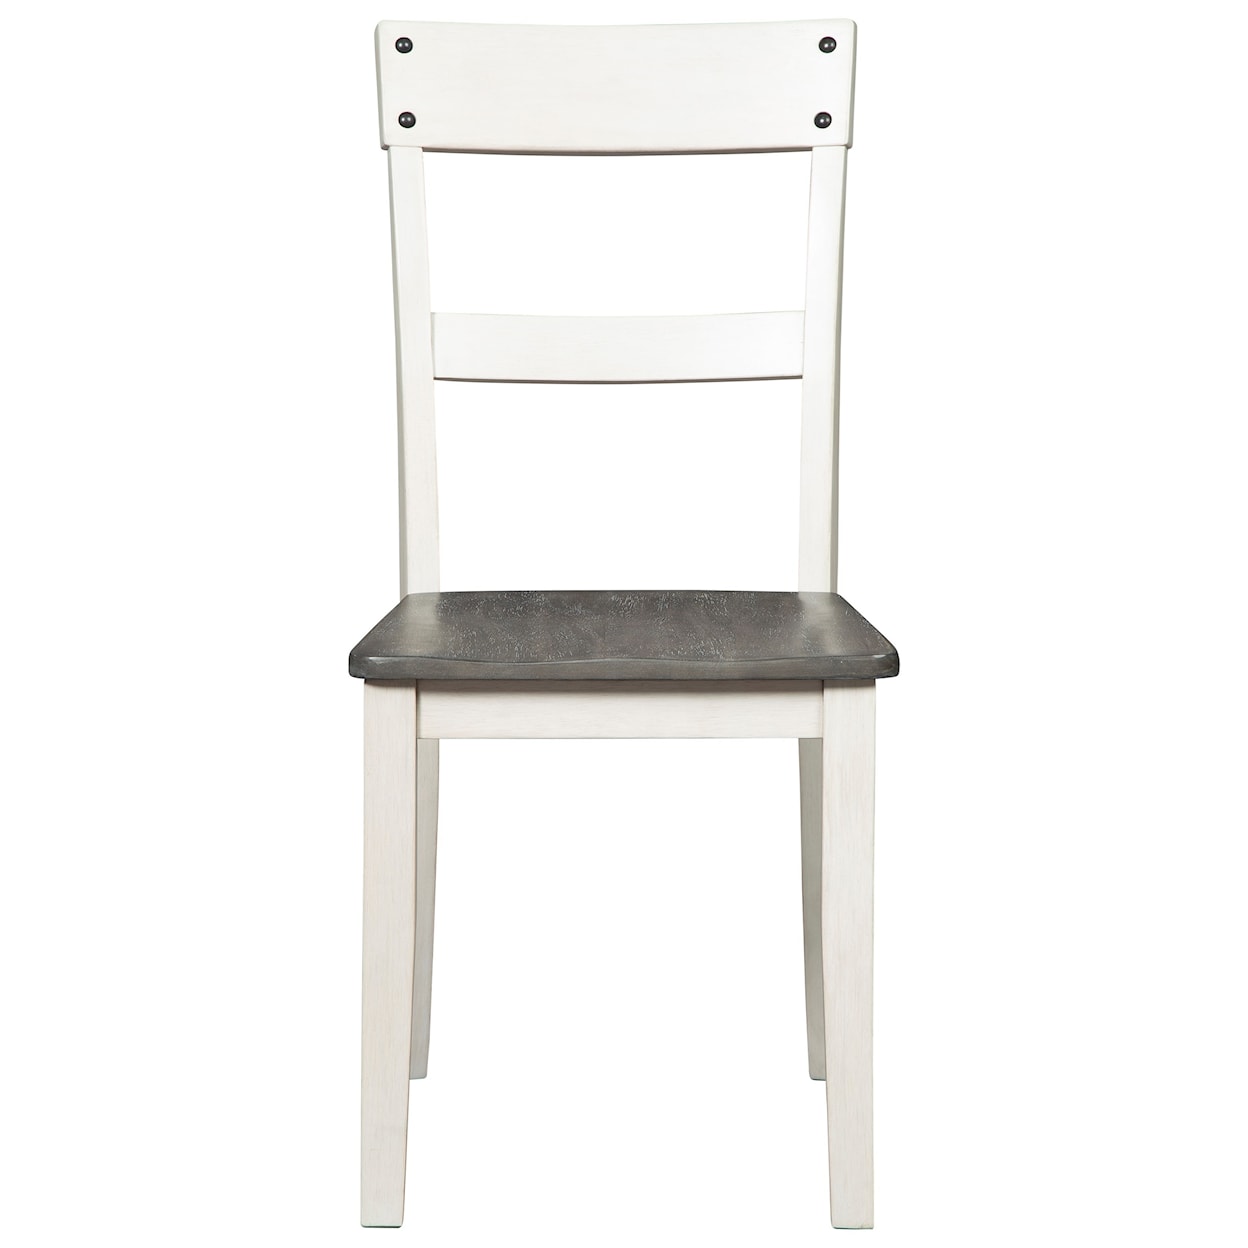 Signature Design by Ashley Nelling Dining Room Side Chair